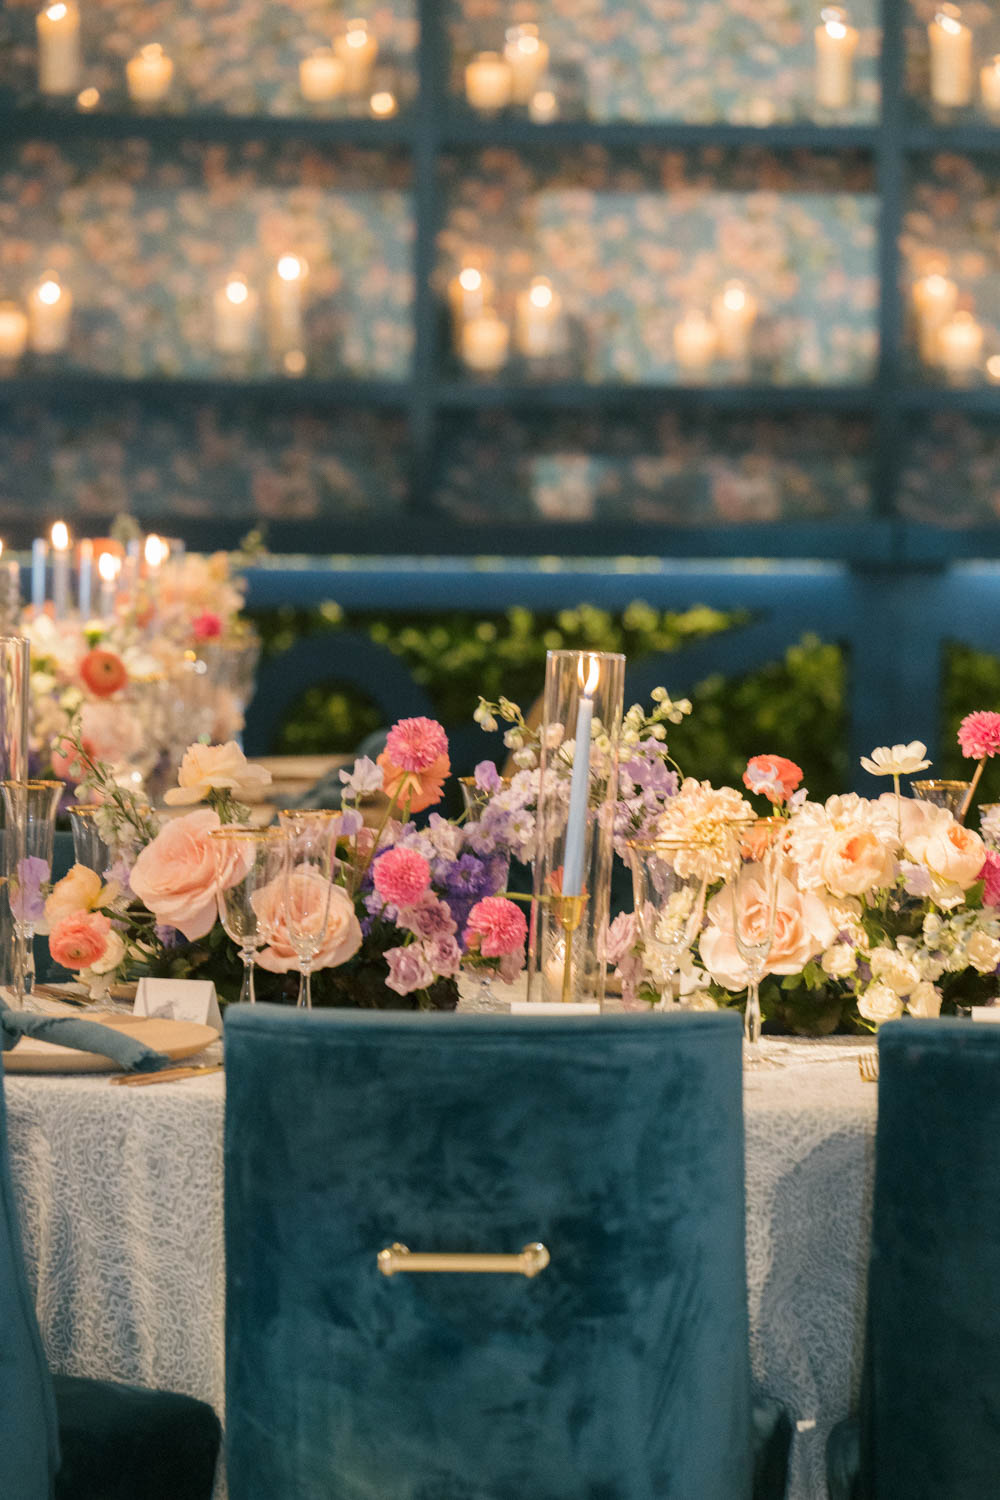 A colorful wedding reception in Chicago, Illinois.